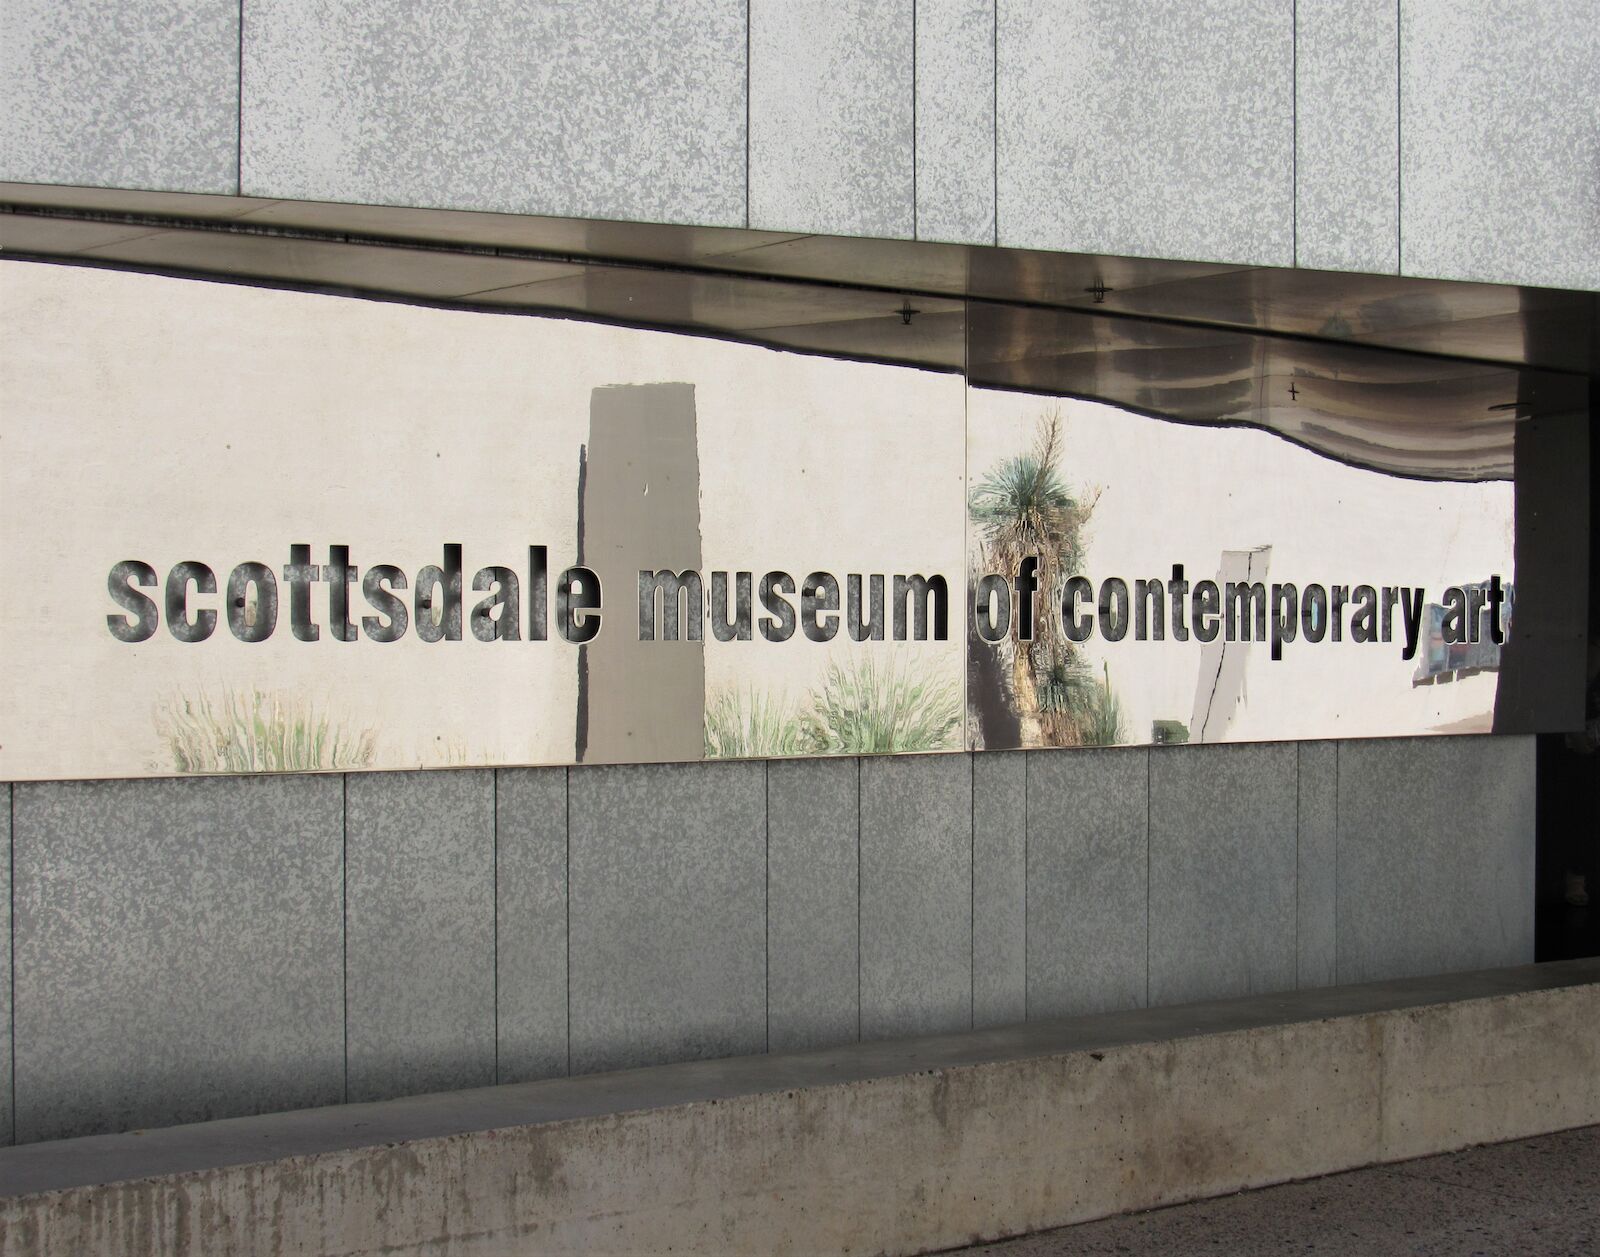 Scottsdale, Arizona / USA - September 10 2019: A sign reading "Scottsdale Museum of Contemporary Art," located in the Old Town district in the Civic Center Mall